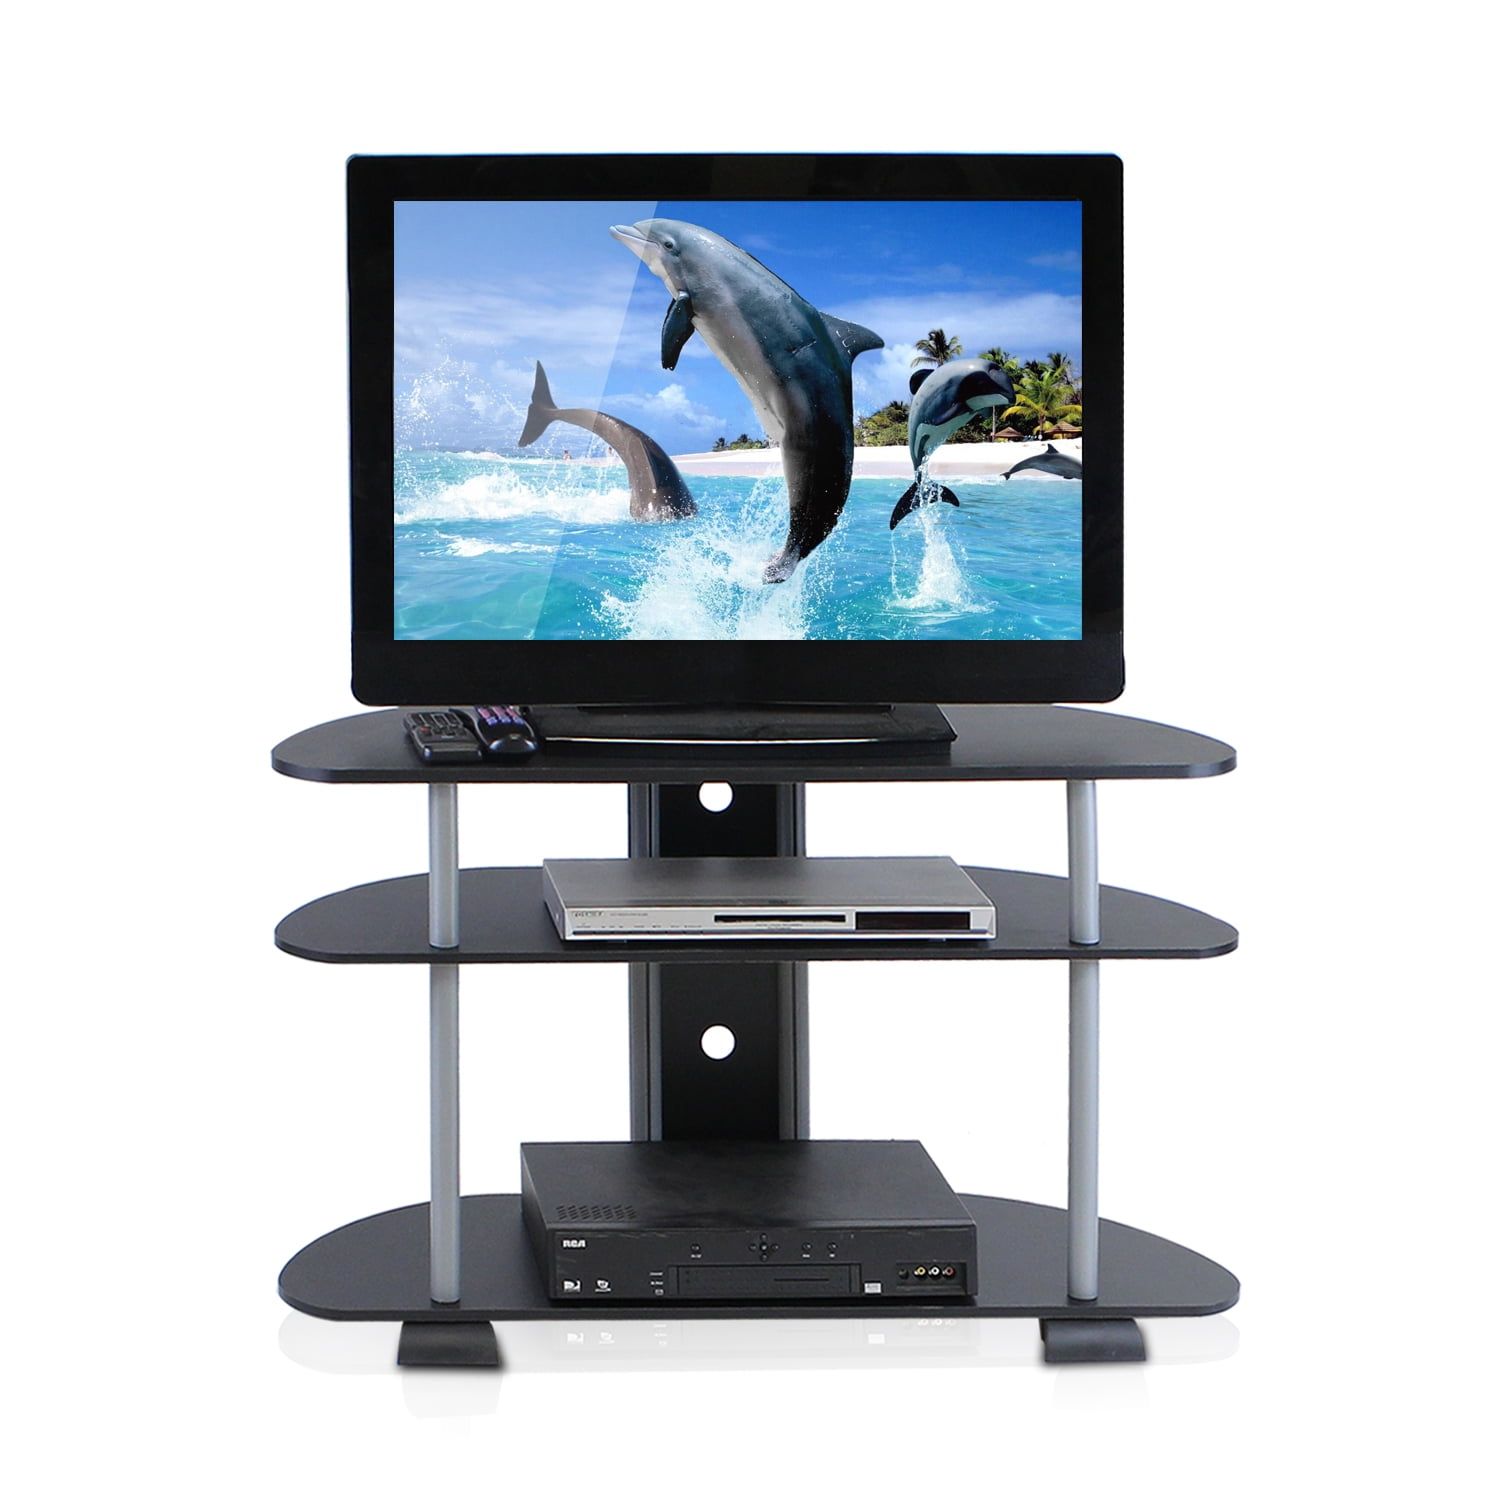 Turn N Tube 3 Tier Tv Stand For Tvs Up To 42", Multiple Colors Intended For Tier Stands For Tvs (View 10 of 20)